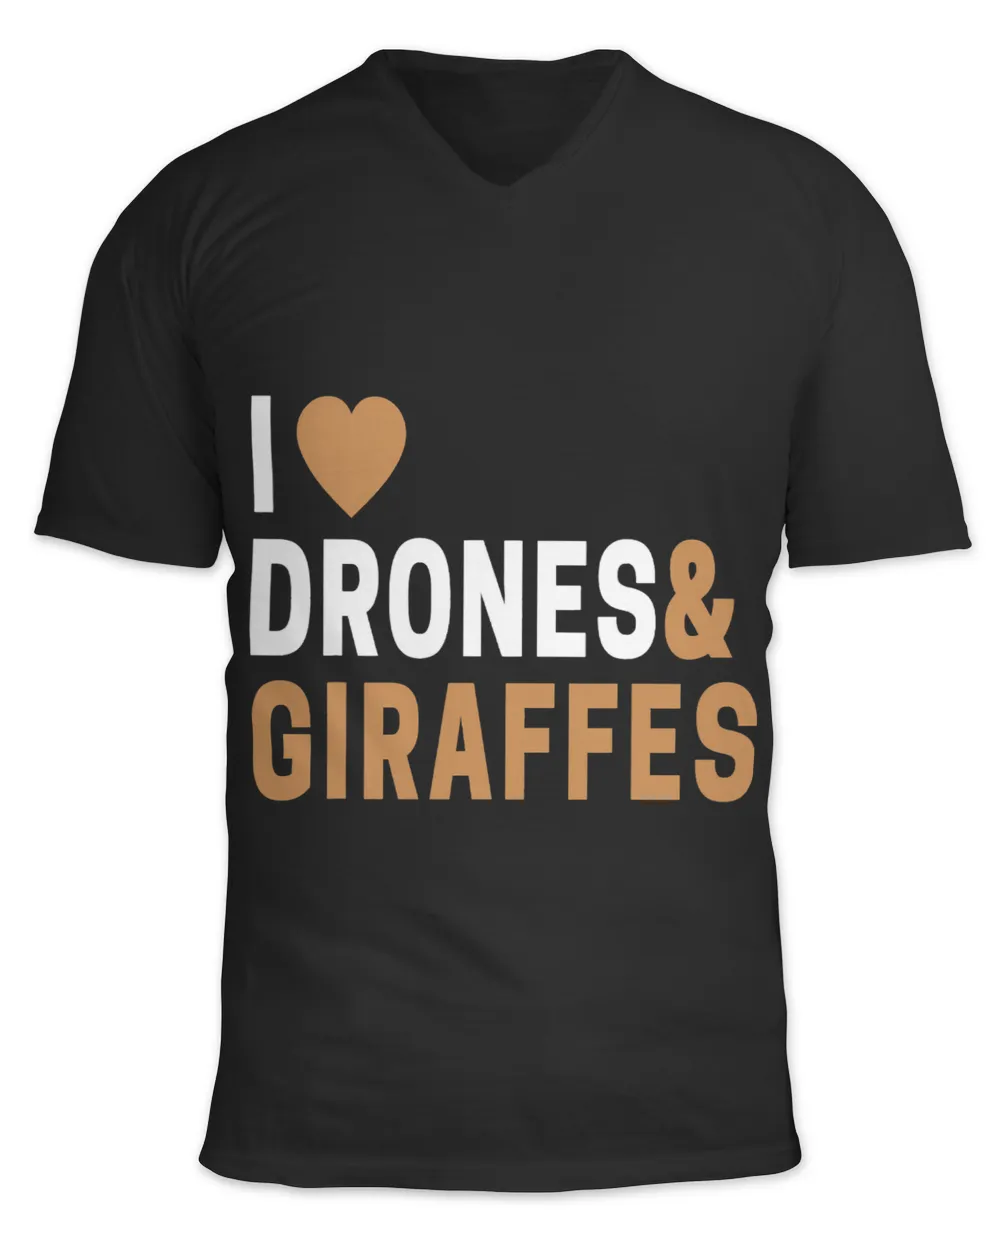 I Love Giraffes And Drones